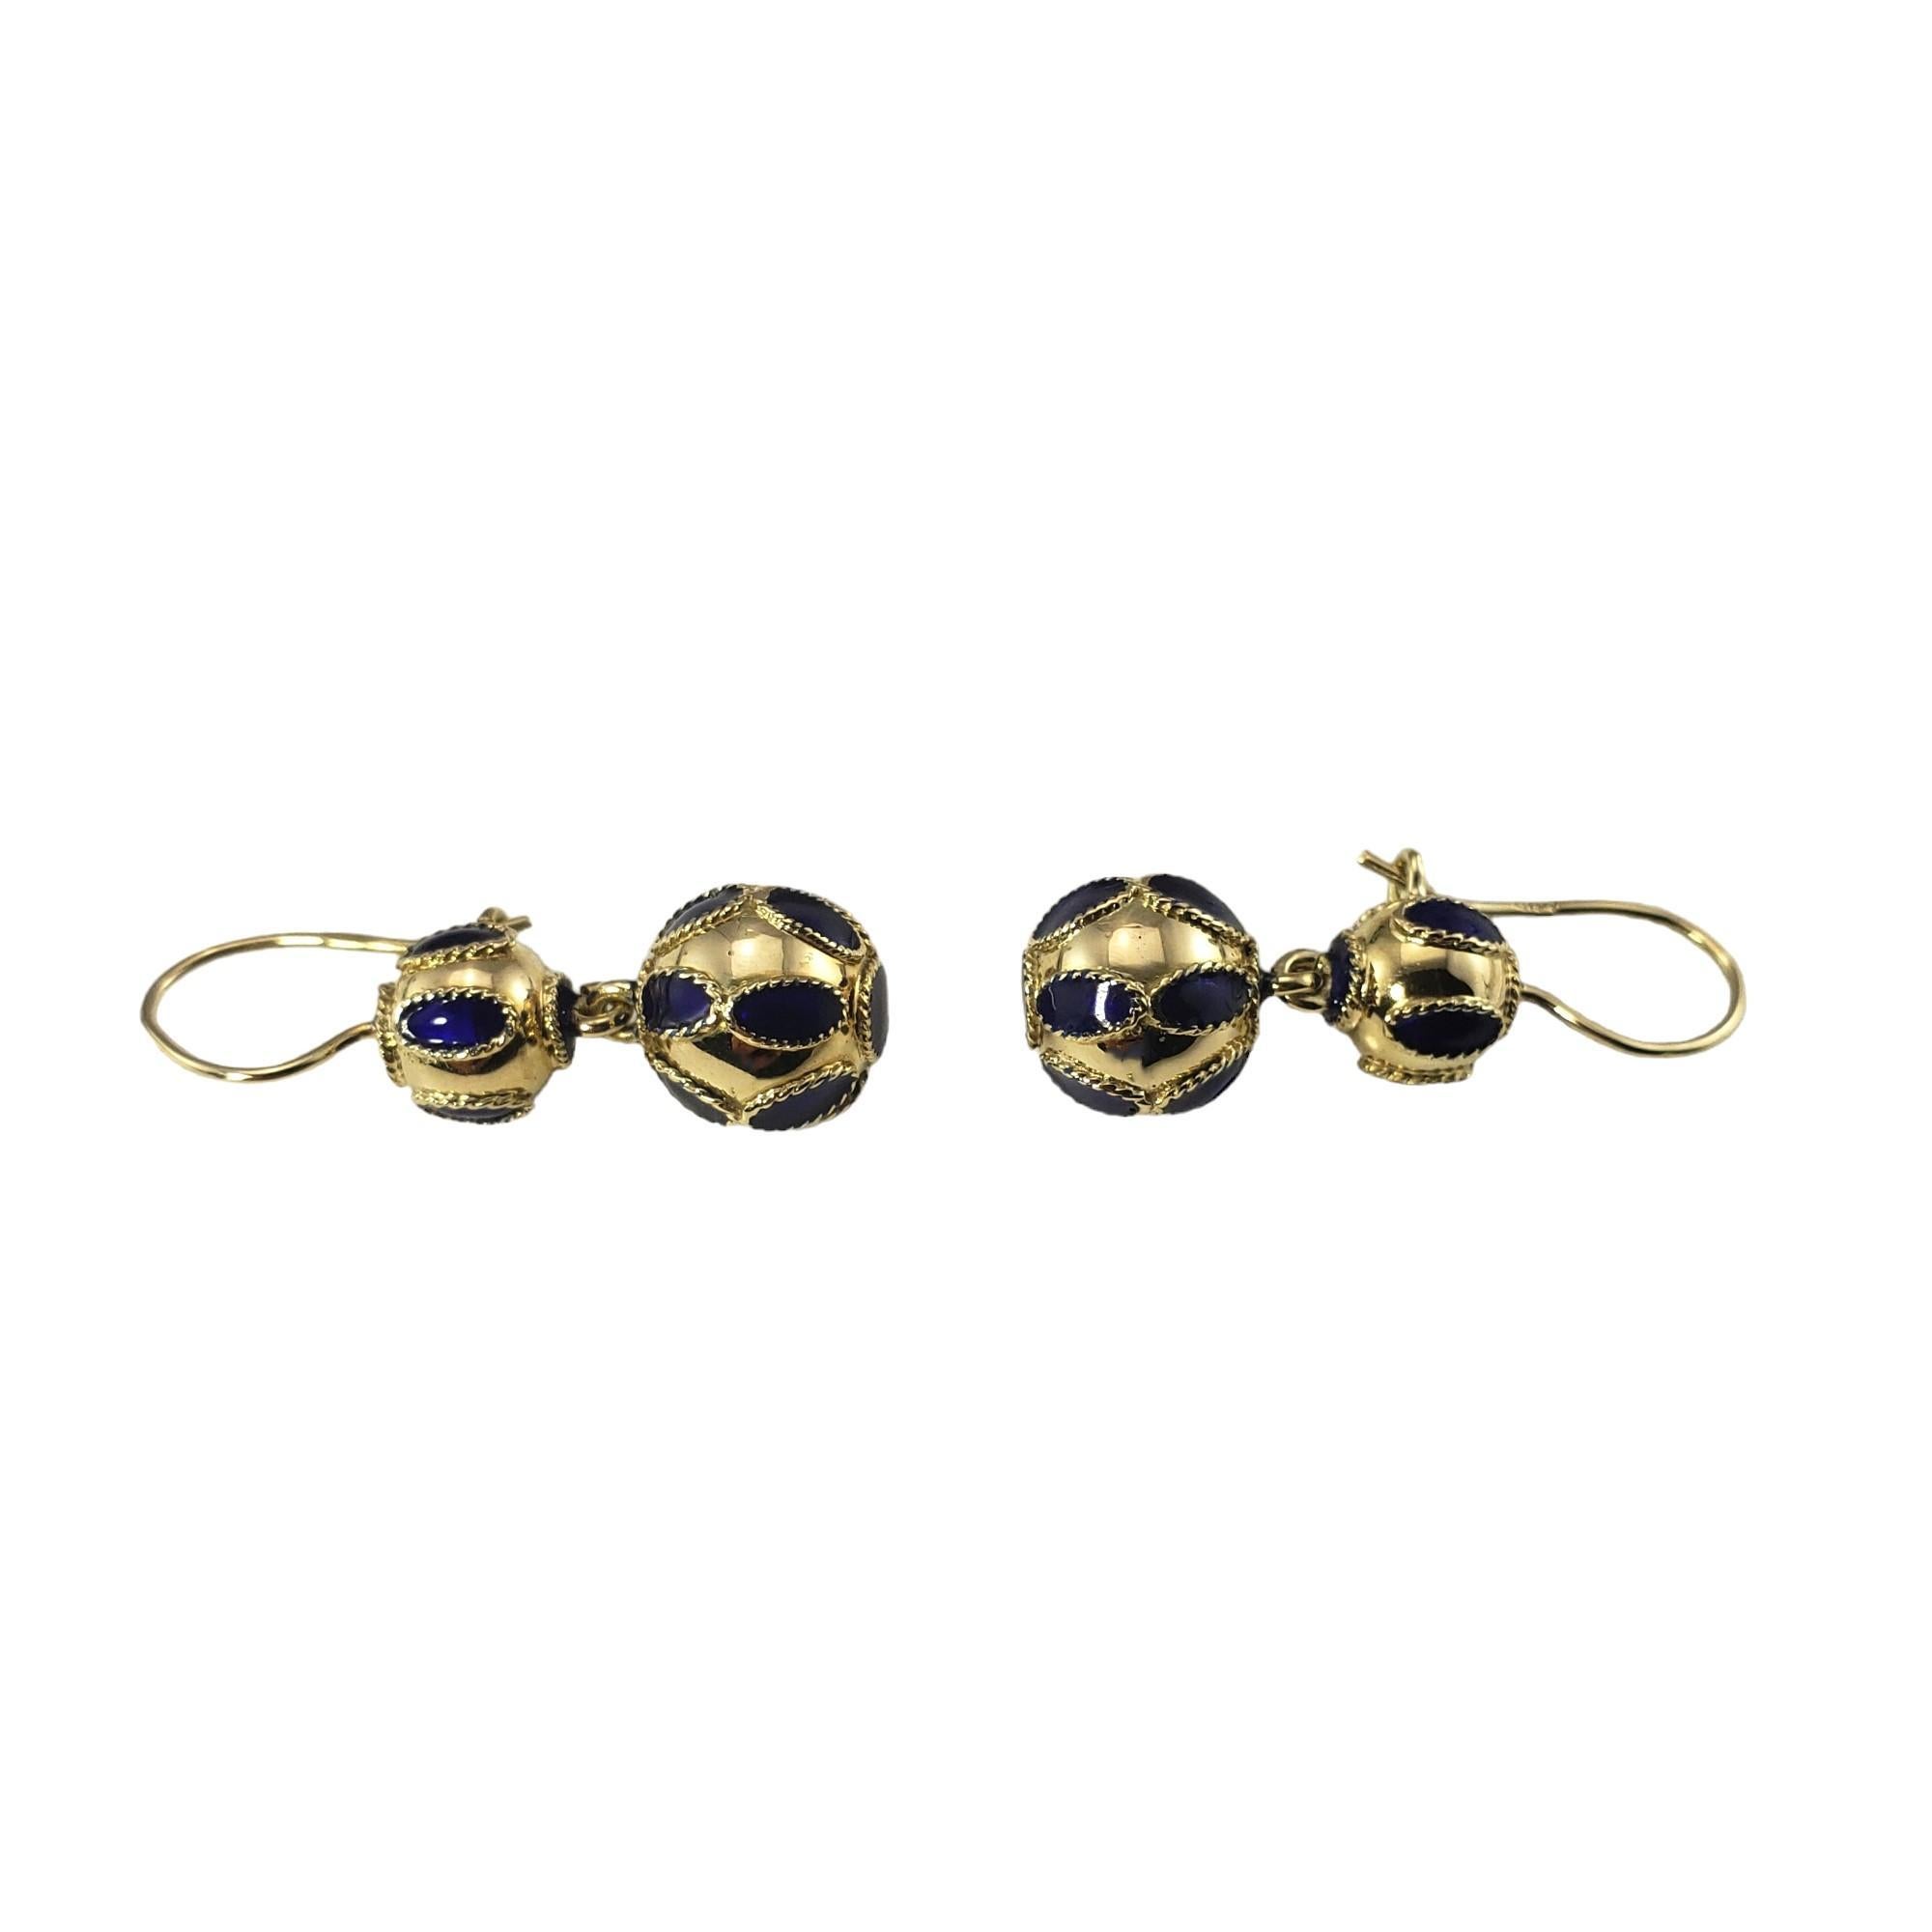 Vintage 14 Karat Yellow Gold and Enamel Dangle Earrings-

These elegant drop earrings are crafted in beautifully detailed 14K yellow gold and accented with blue enamel.

Size:  30.4 mm x 10.2 mm

Weight: 3.5 gr./ 2.3 dwt.

Stamped:  585

Very good